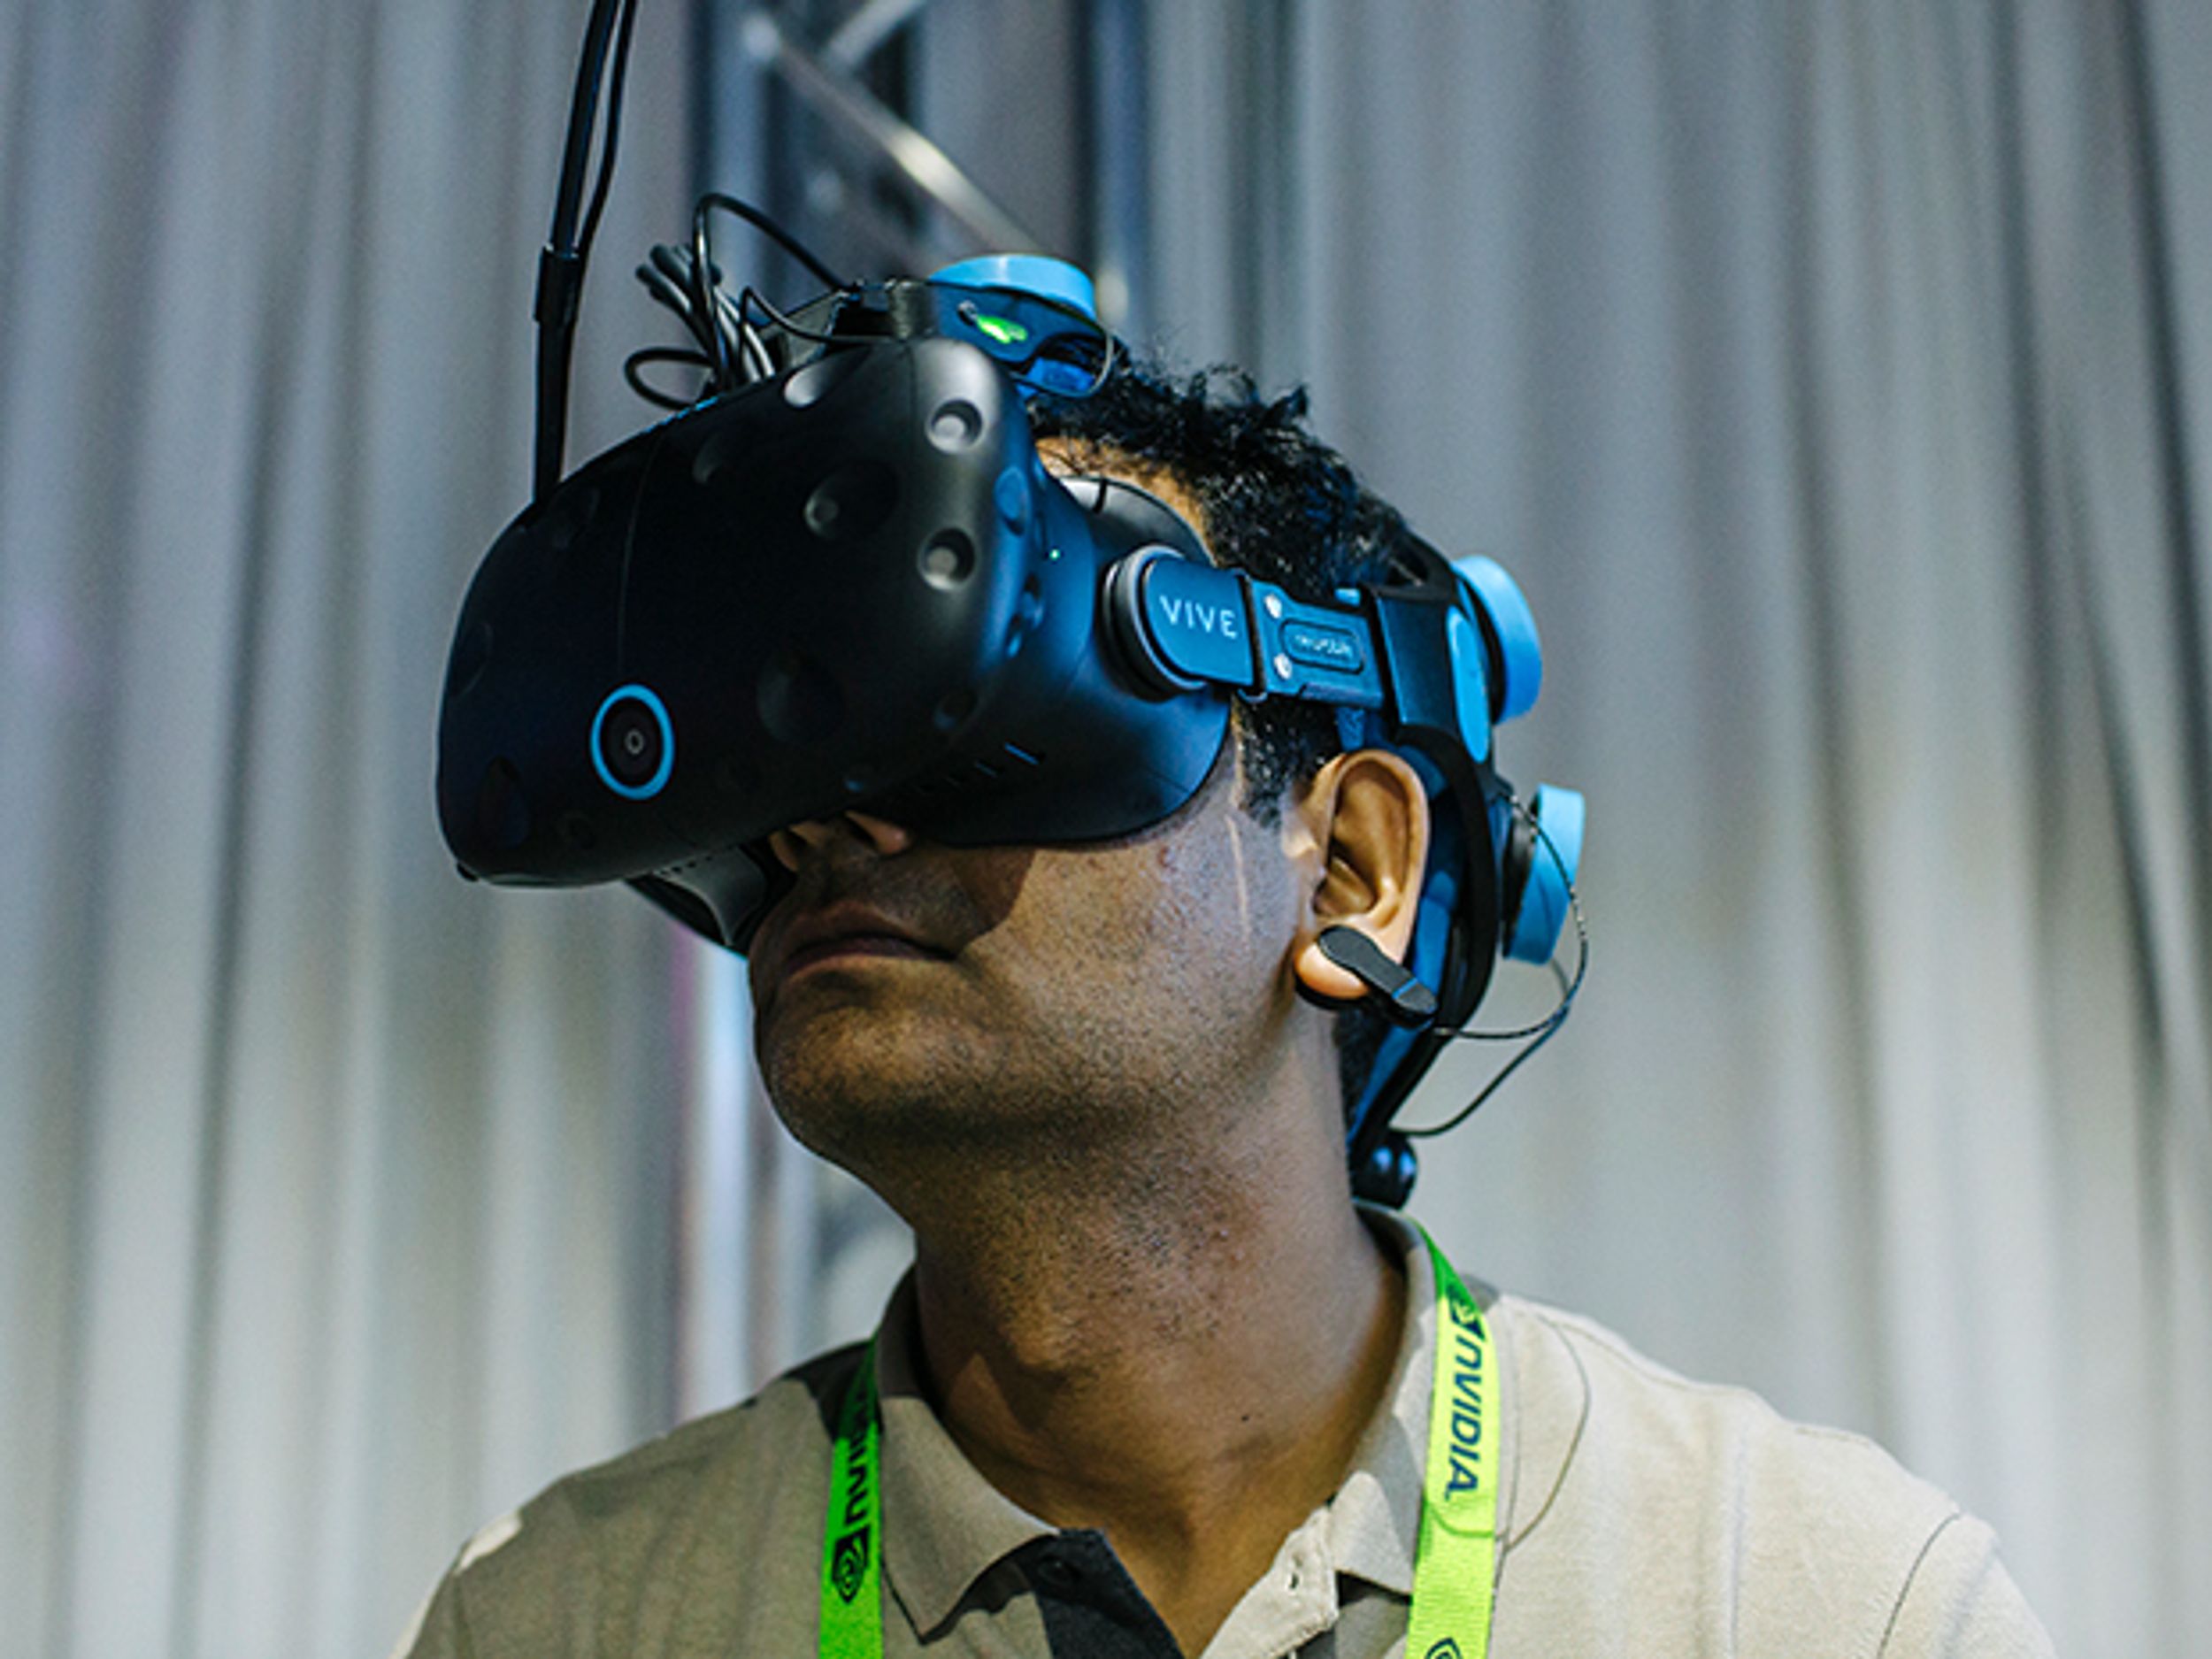 A man wears a VR headset to play a mind-controlled game in virtual reality.